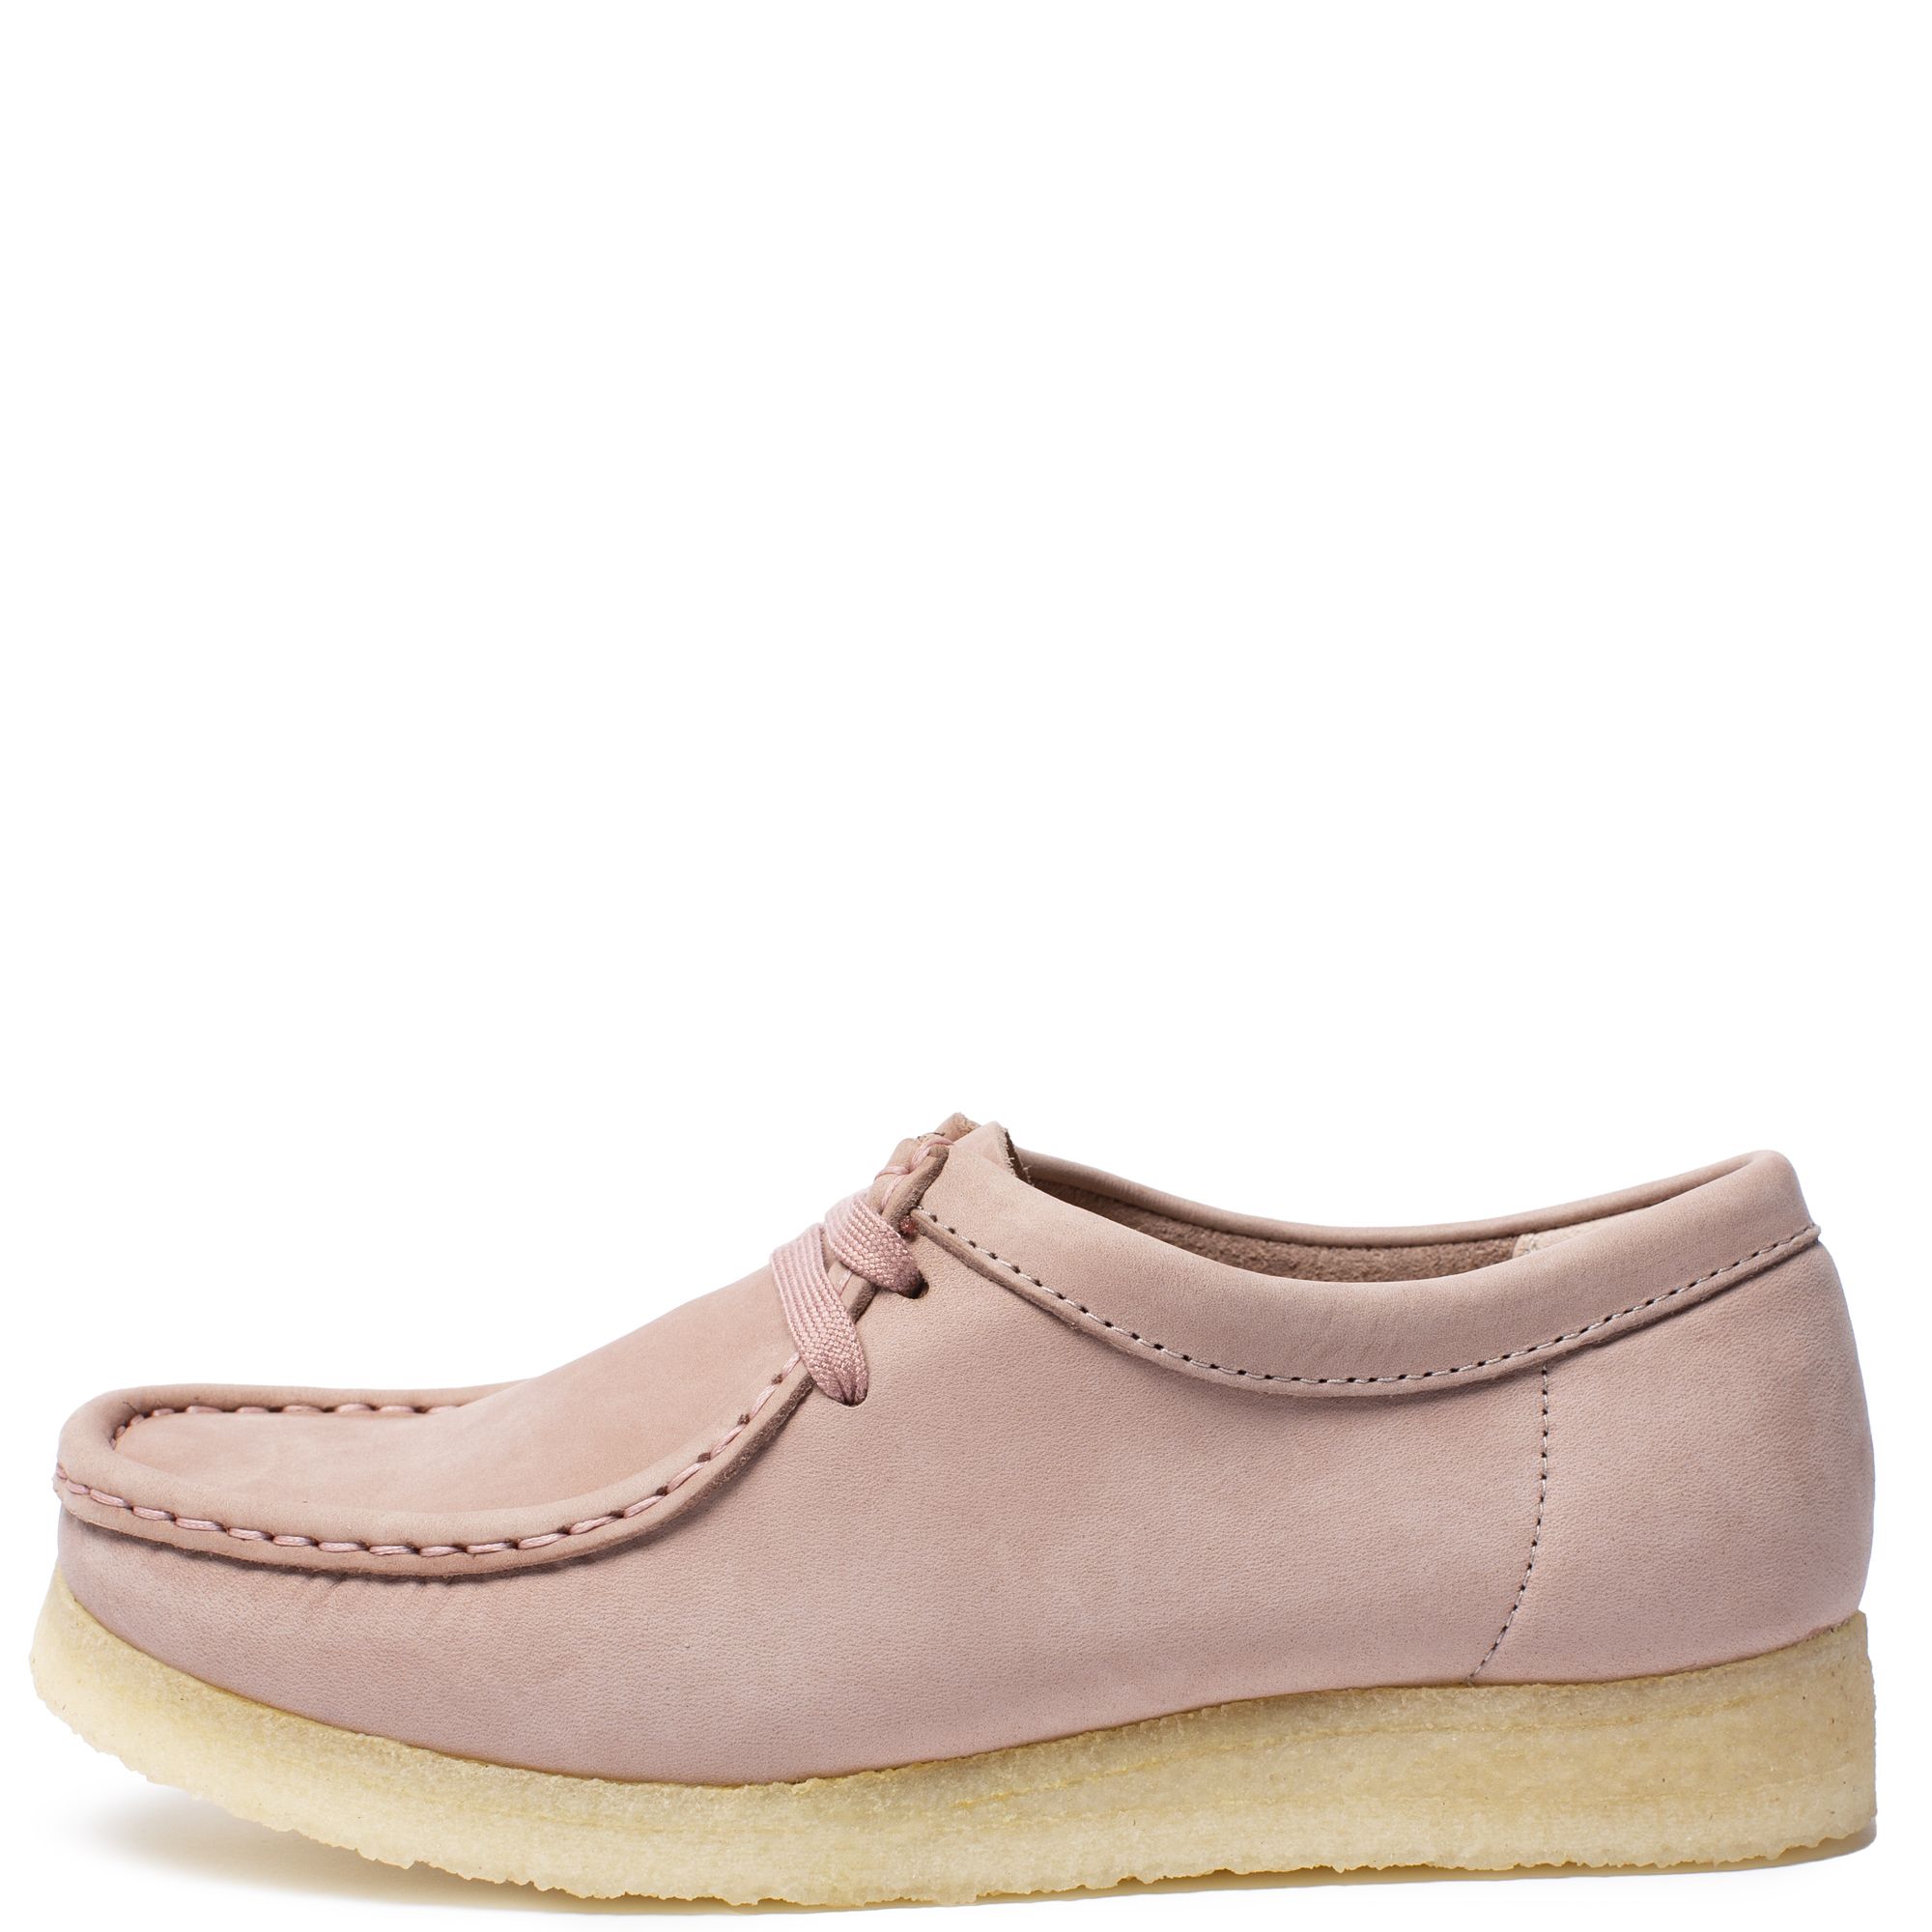 imperium At opdage ned CLARKS Wallabee 26165558 - Shiekh